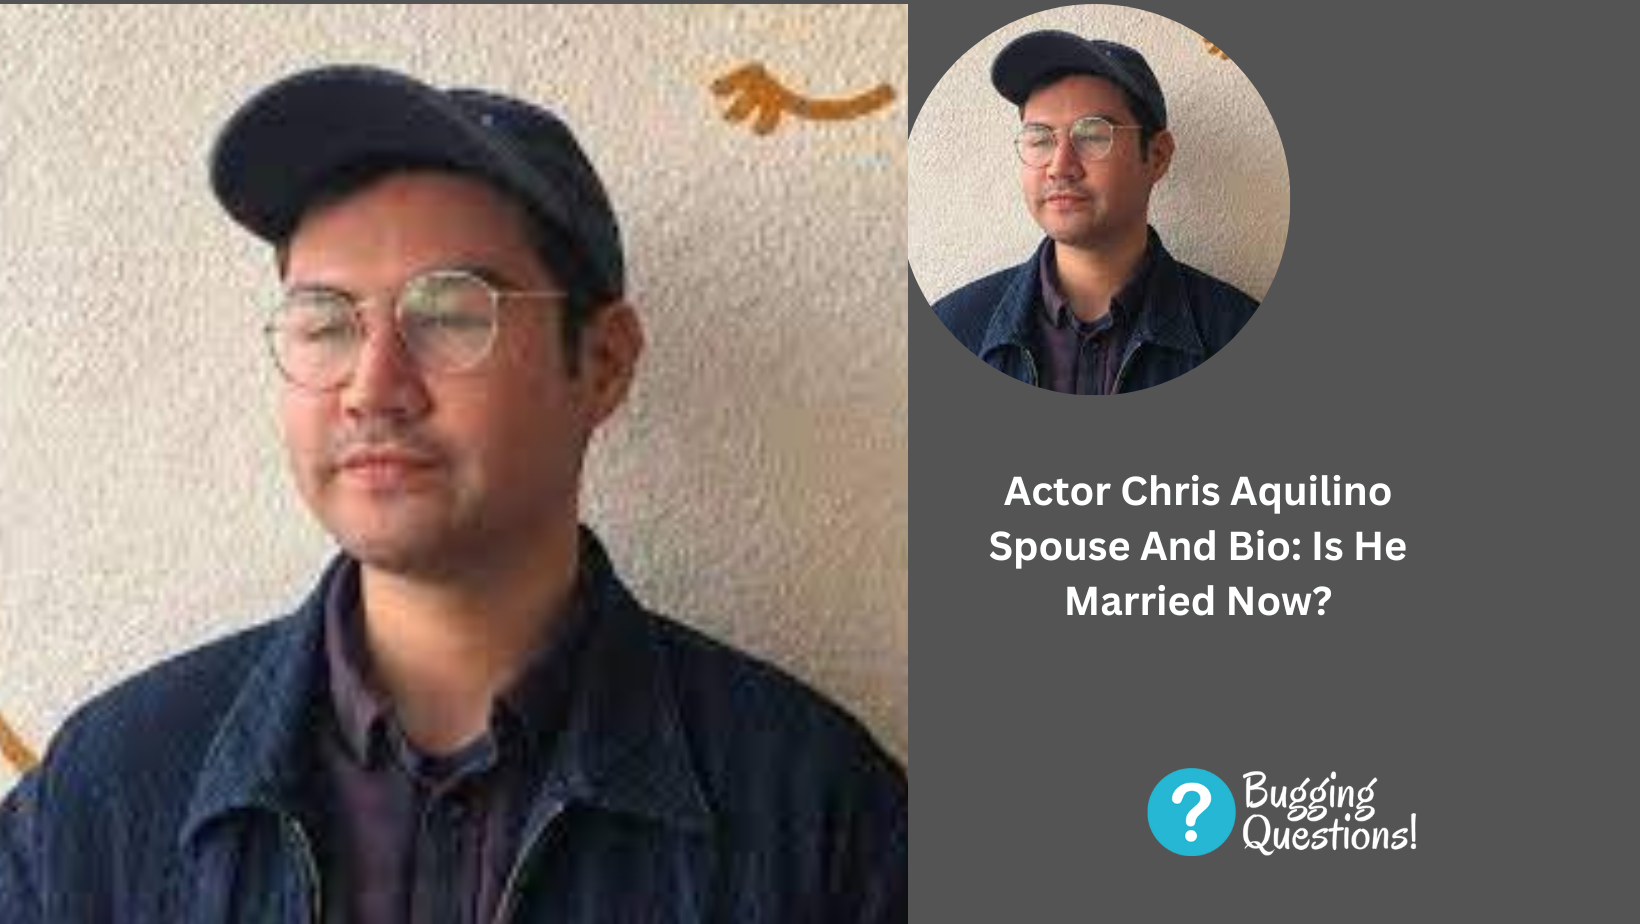 Actor Chris Aquilino Spouse And Bio: Is He Married Now?